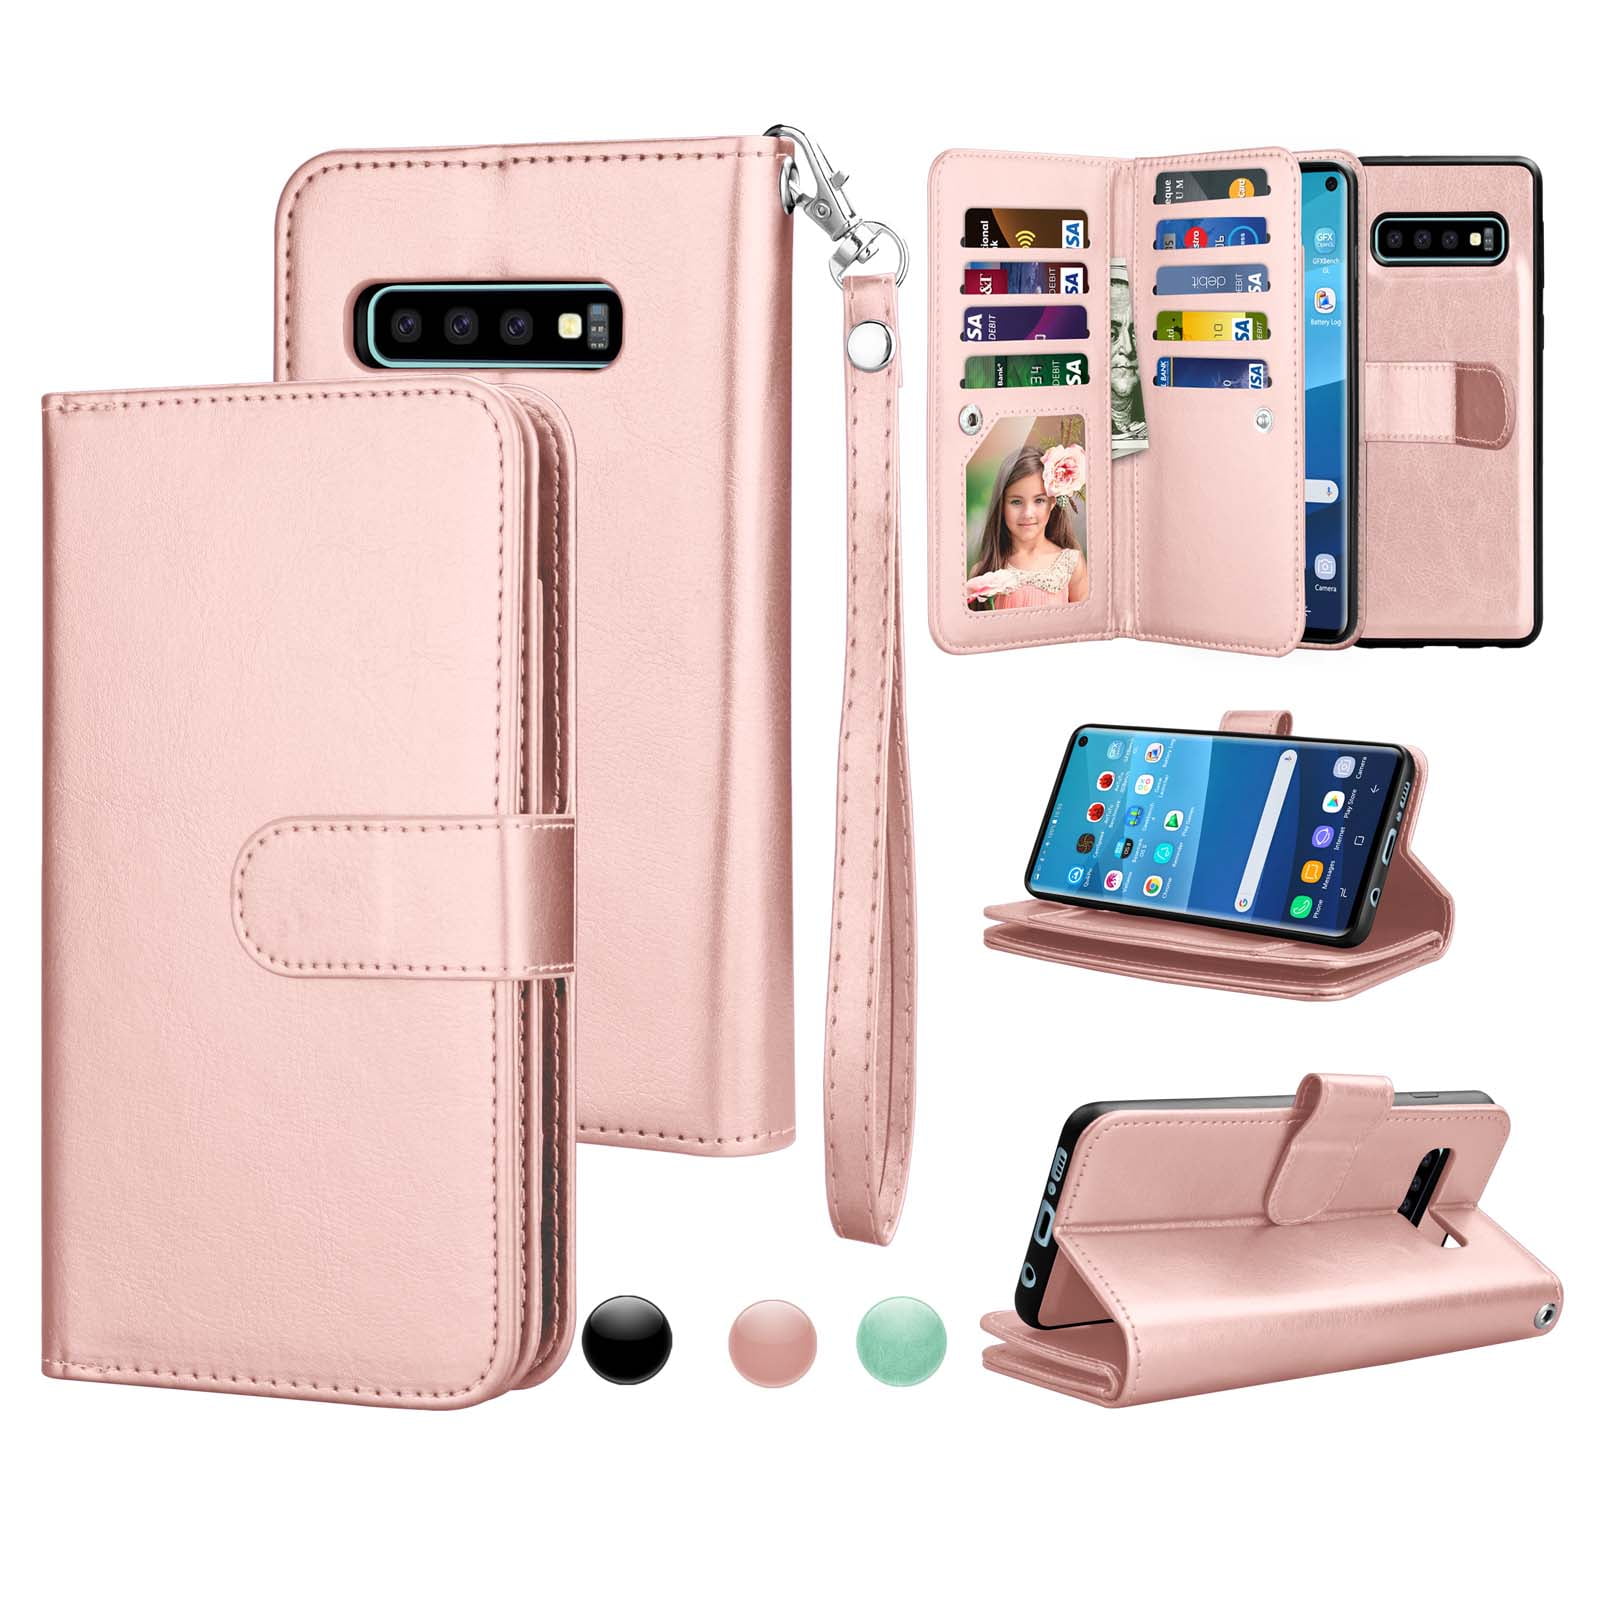 Red Premium Slim Fit Magnetic Car Mount Compatible Wallet Phone Case for The Samsung Galaxy S10 Plus CoverON Galaxy S10 Plus Card Holder Case EDC Series